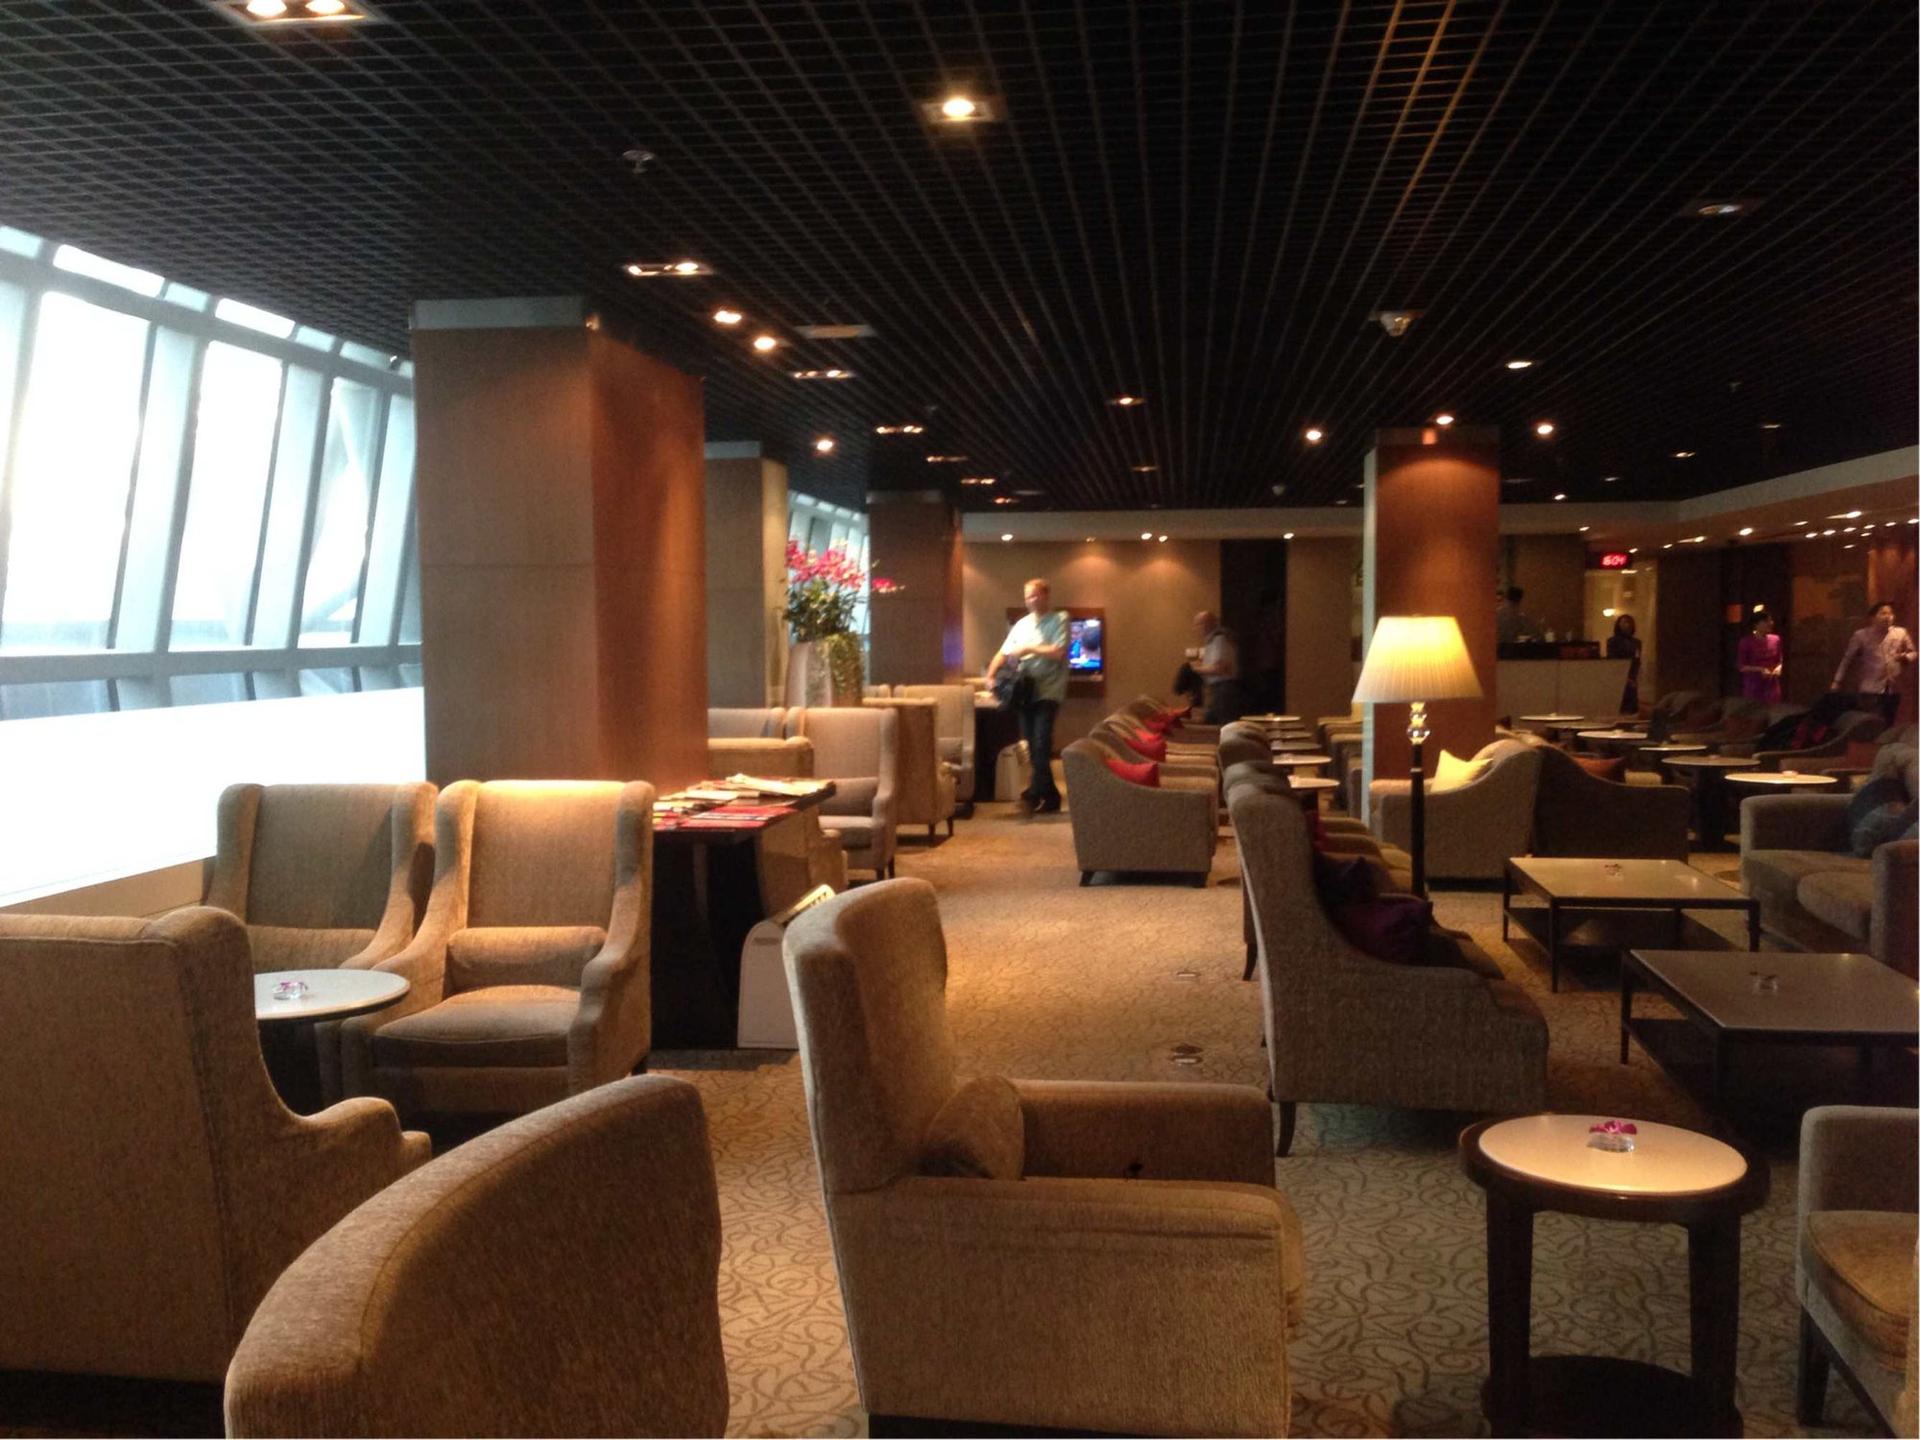 Thai Airways Royal First Class Lounge image 40 of 44